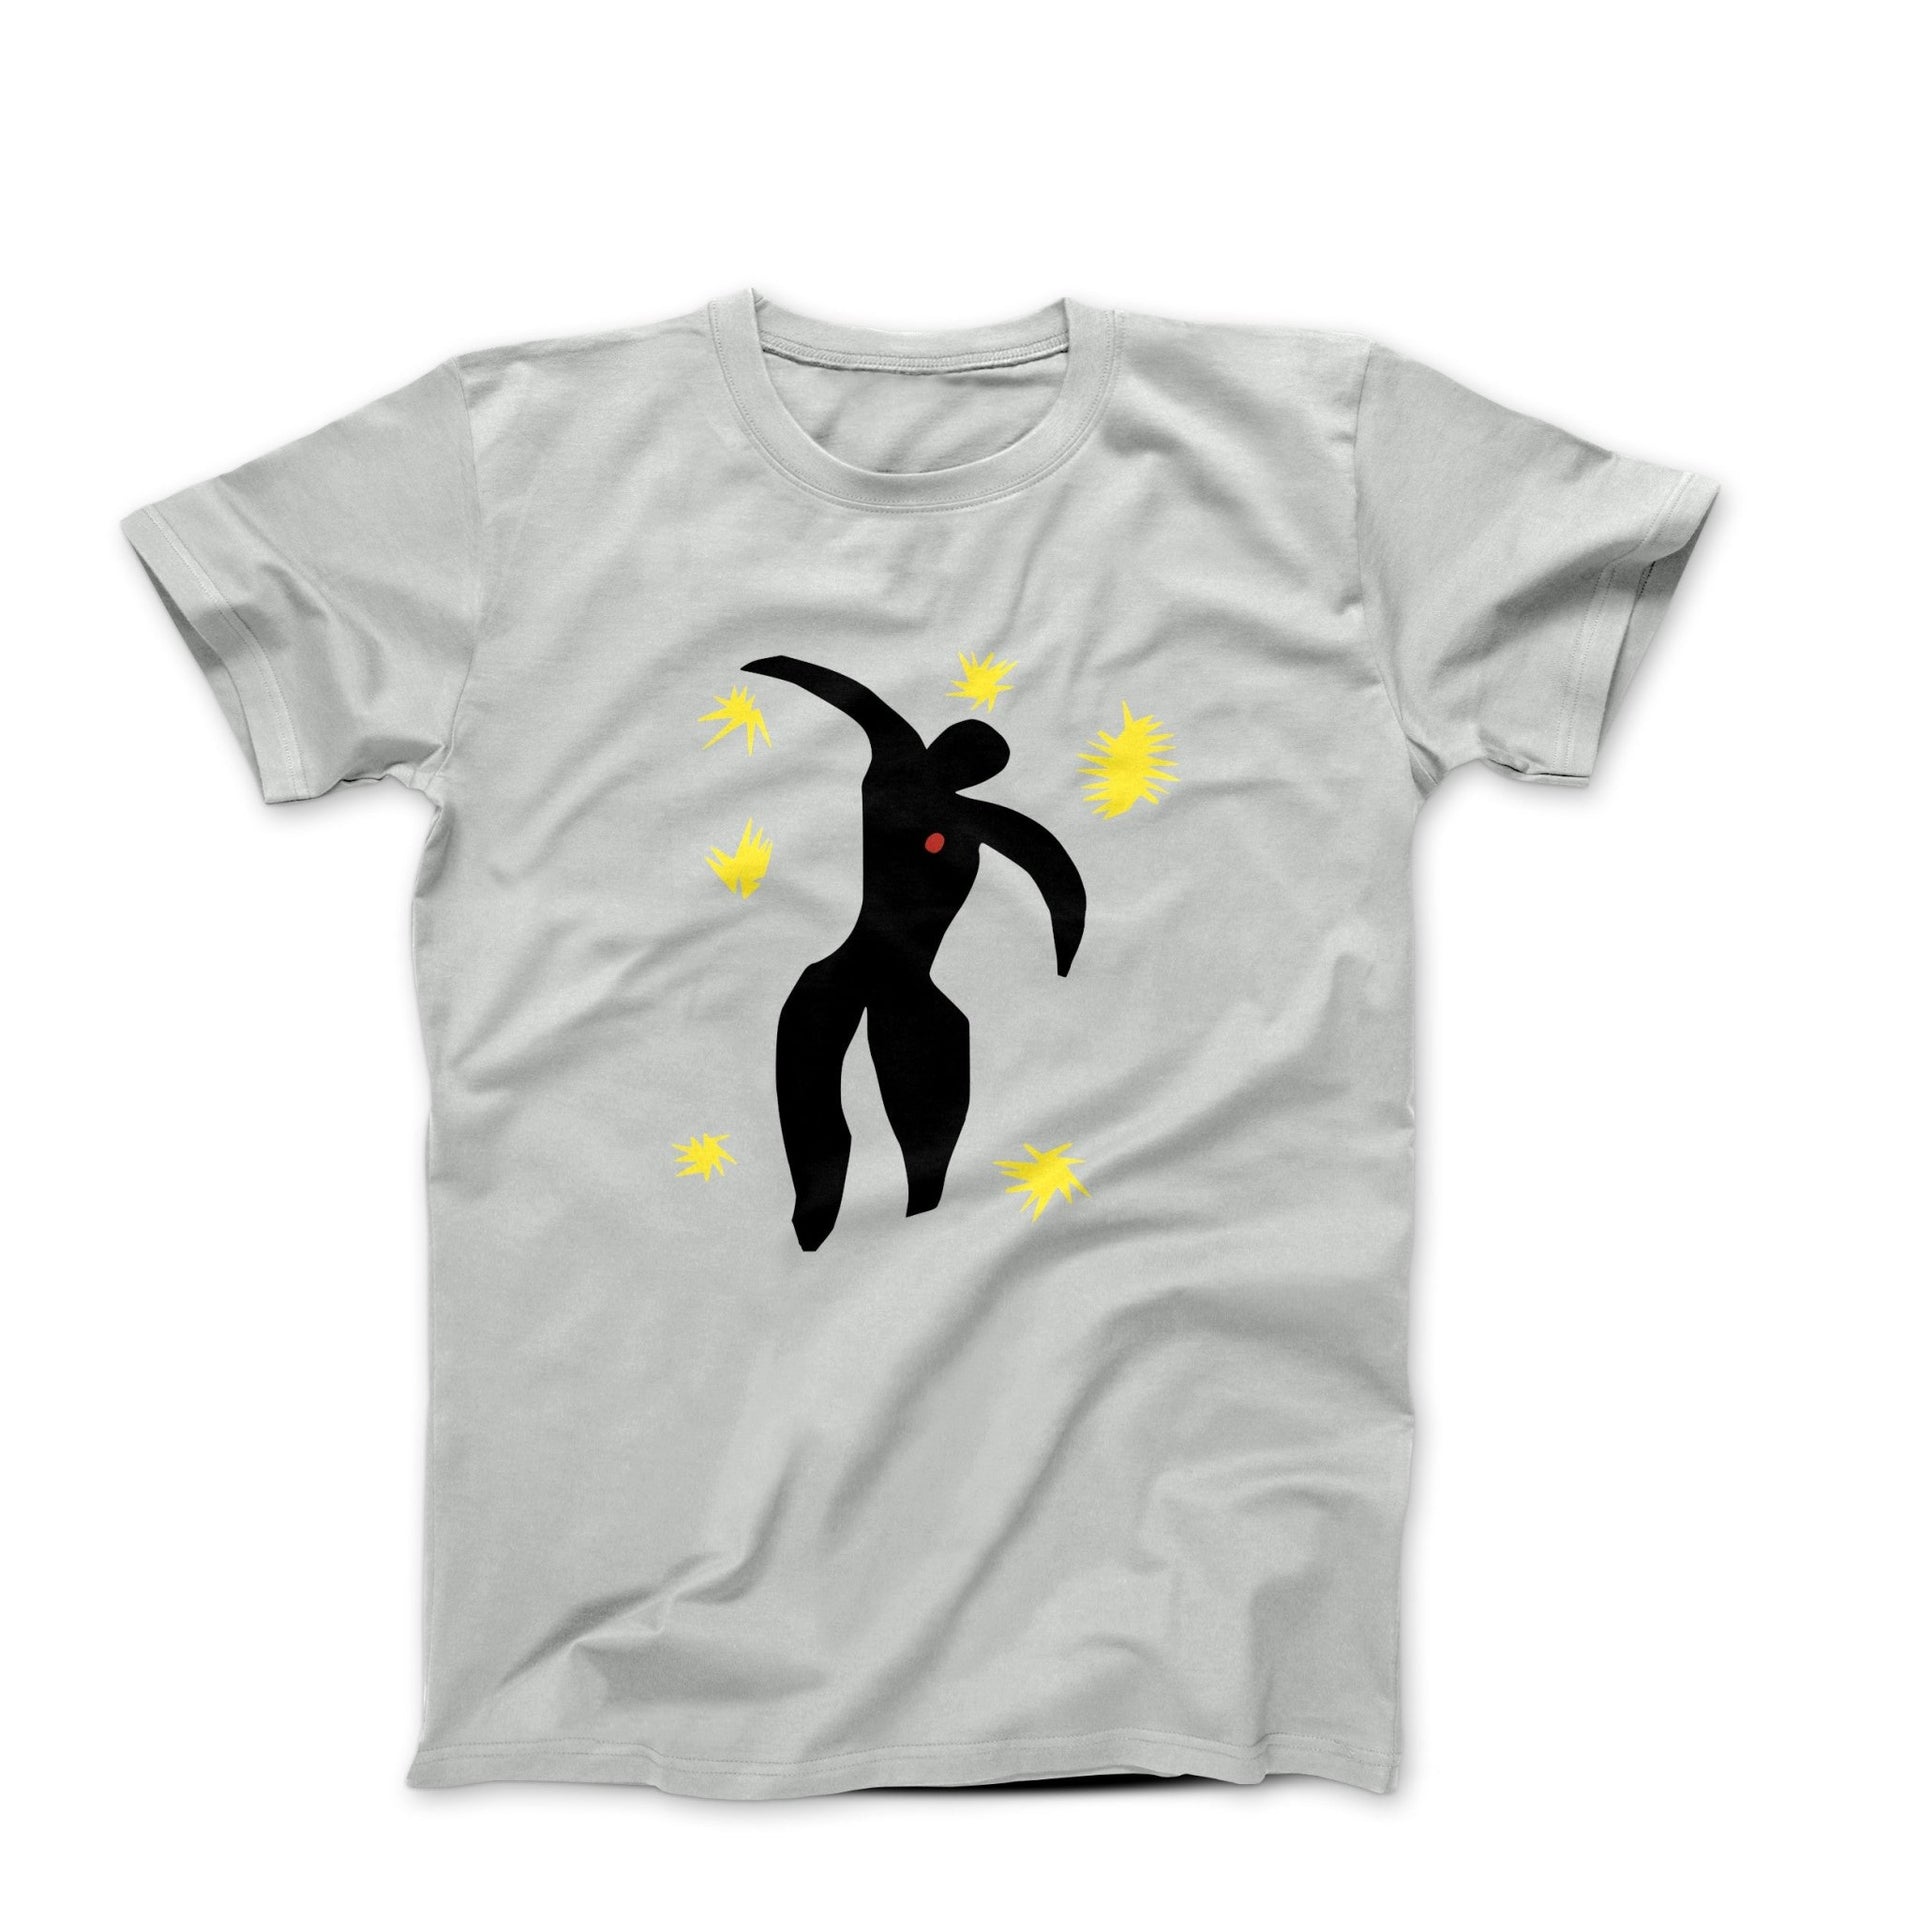 Henri Matisse Icarus Plate VIII from the Book "Jazz" (1947) T-Shirt - Clothing - Harvey Ltd